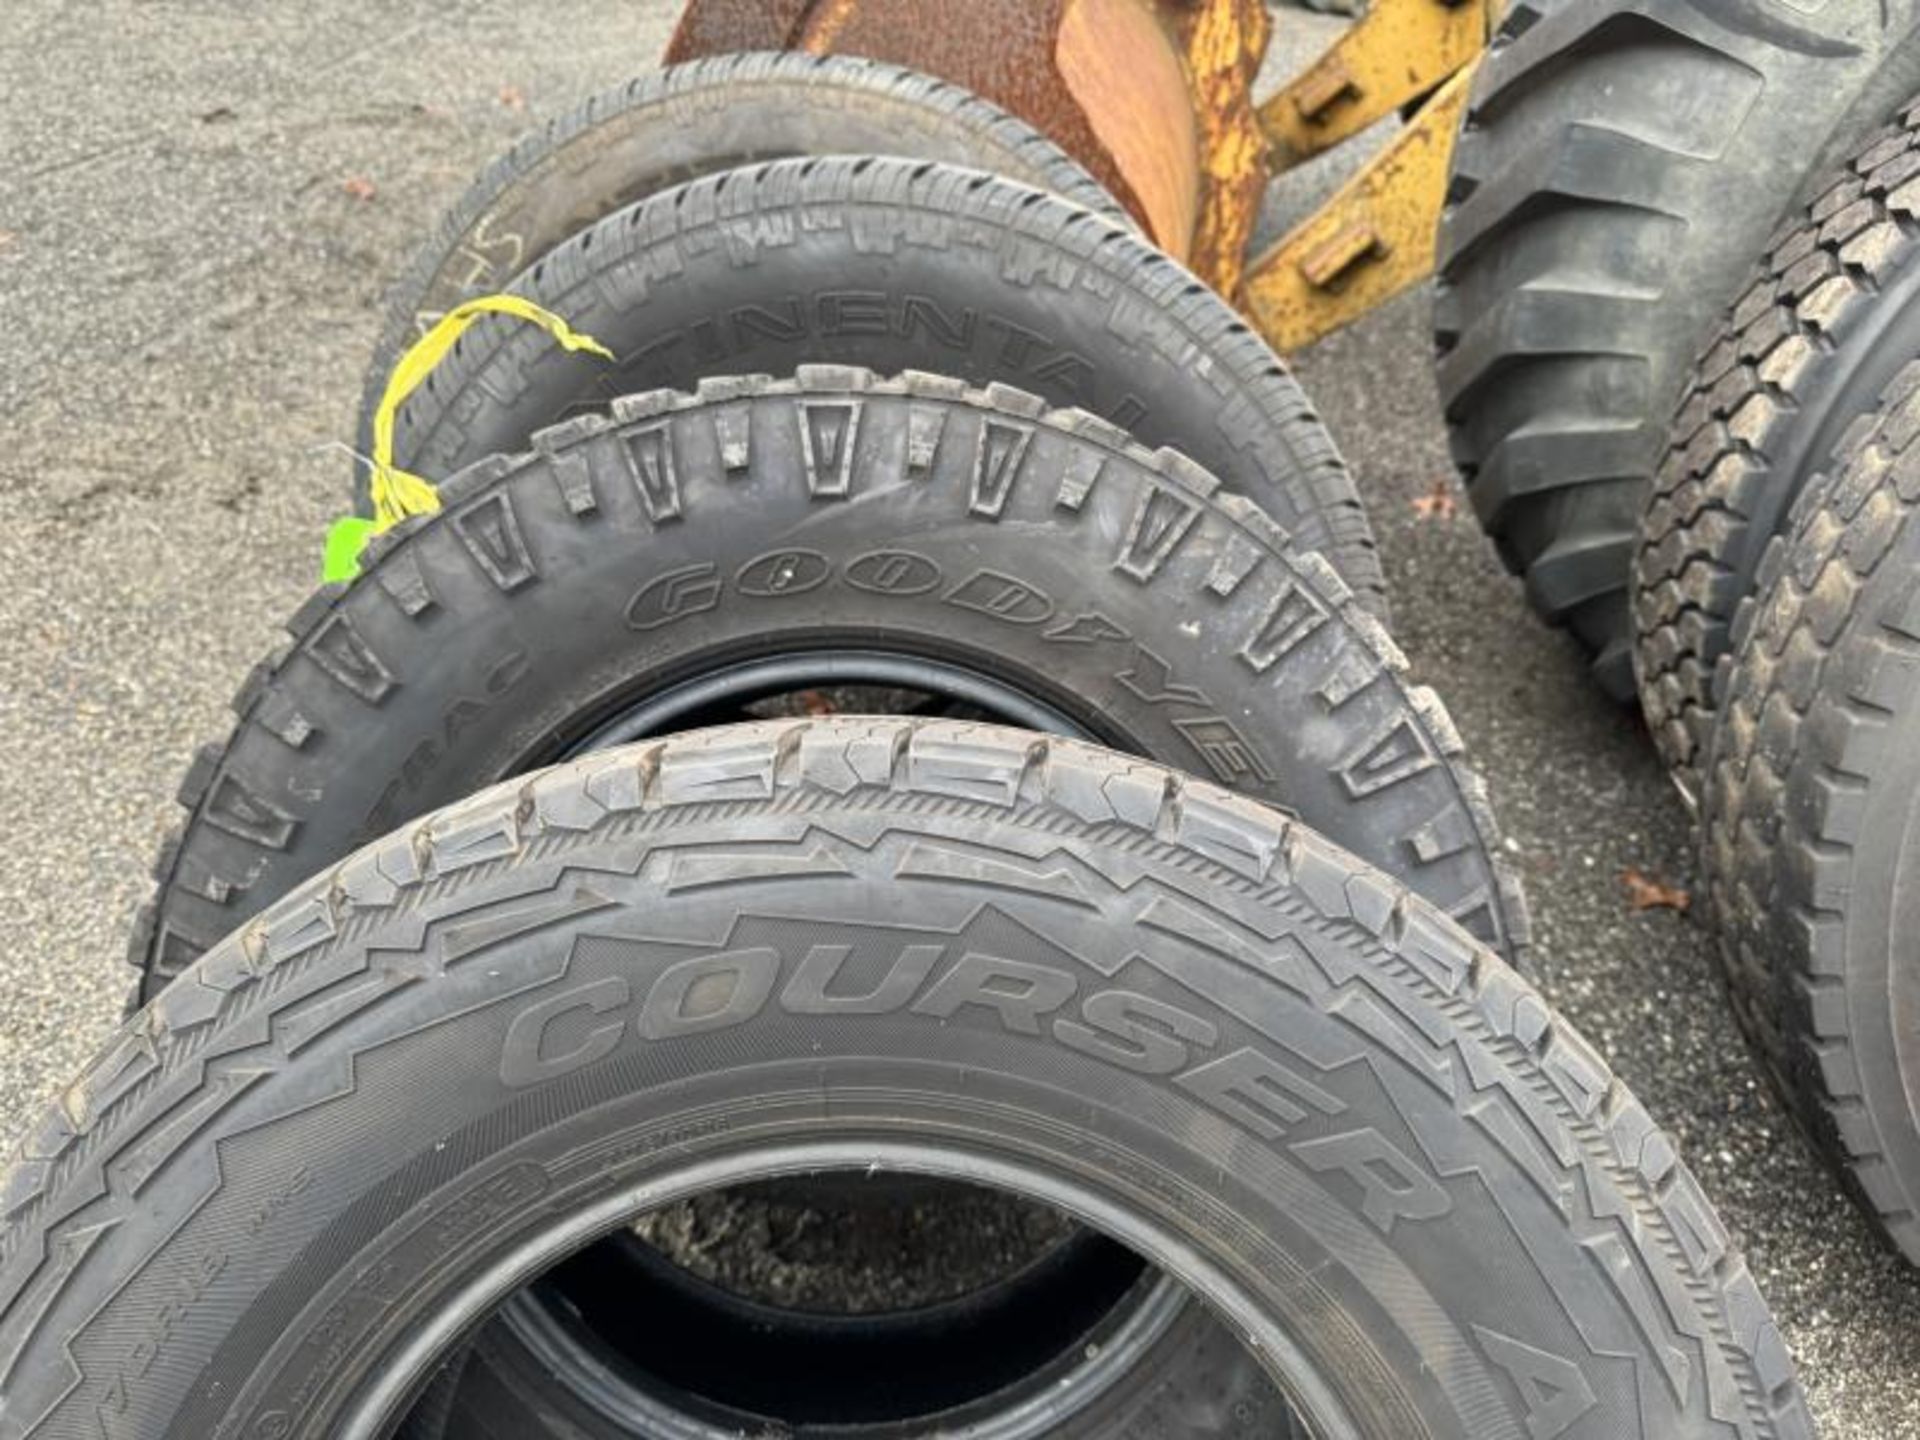 Lot of (4) Tires Including: (1) Courser AXT Master Craft, (1) Goodyear Wrangler Duratrac, (2) Contit - Image 2 of 3